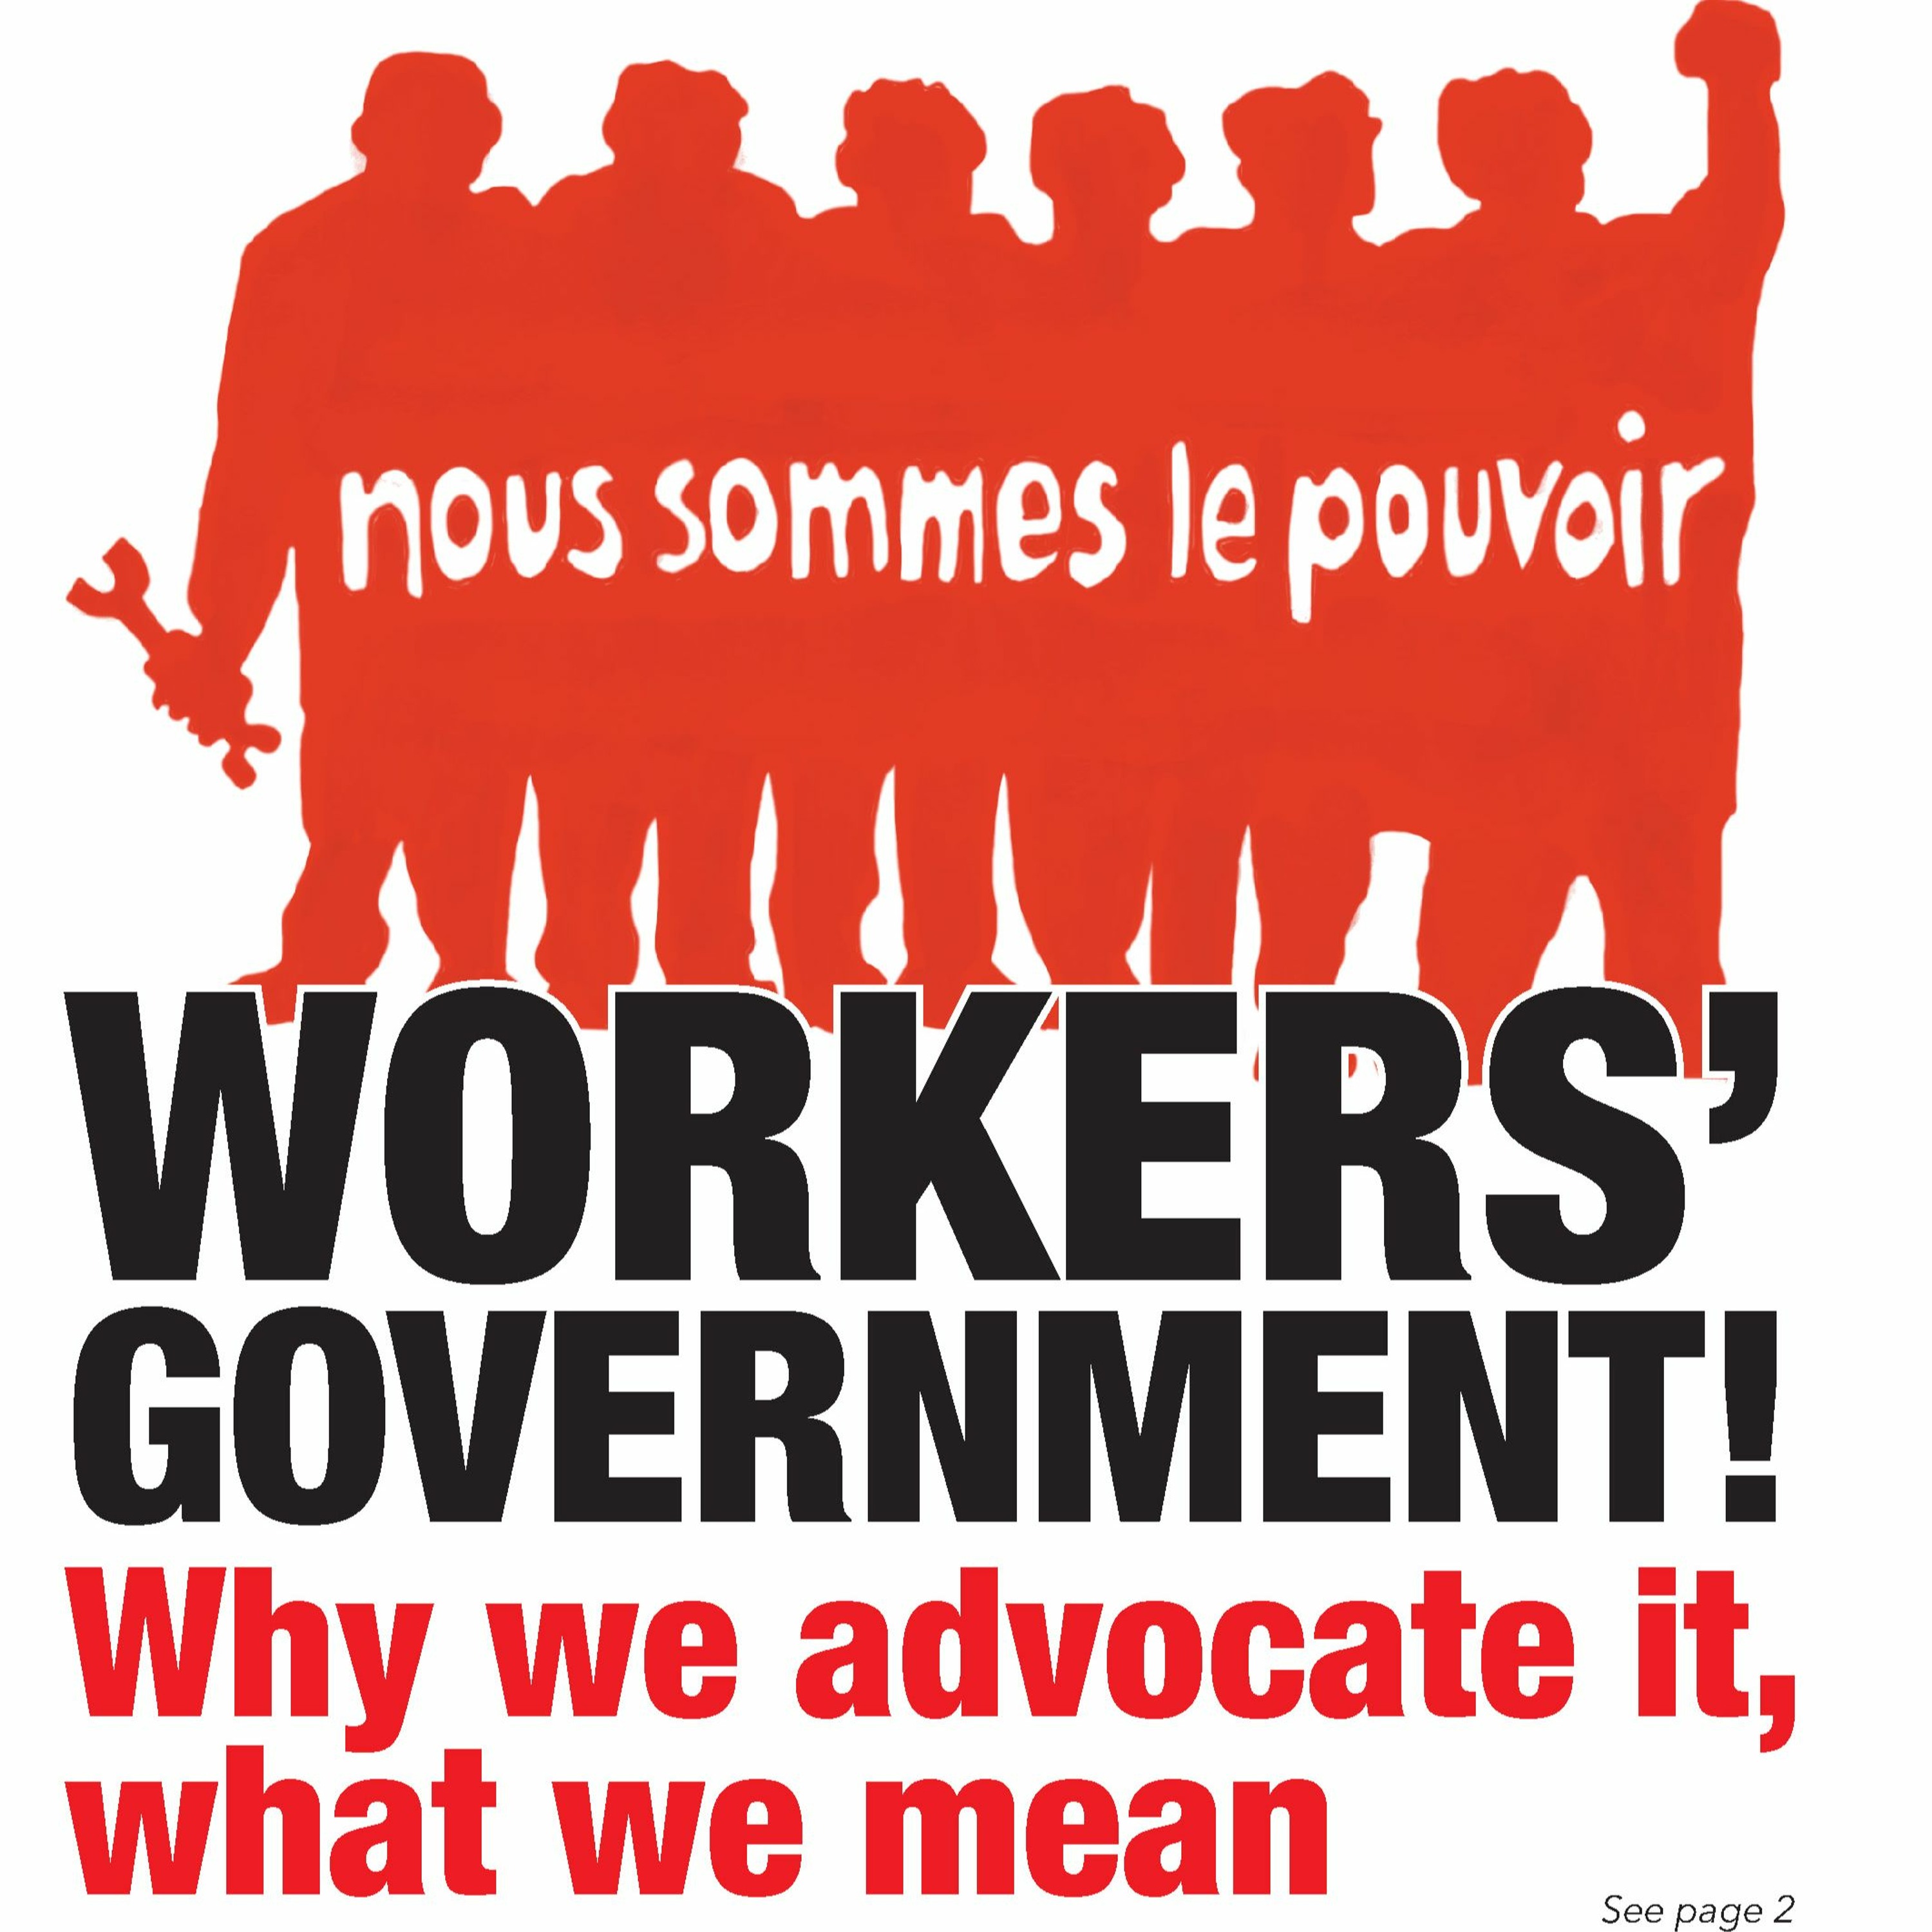 702 — Workers' government: Why we advocate it, what we mean | Russia | Galloway | Tipping points